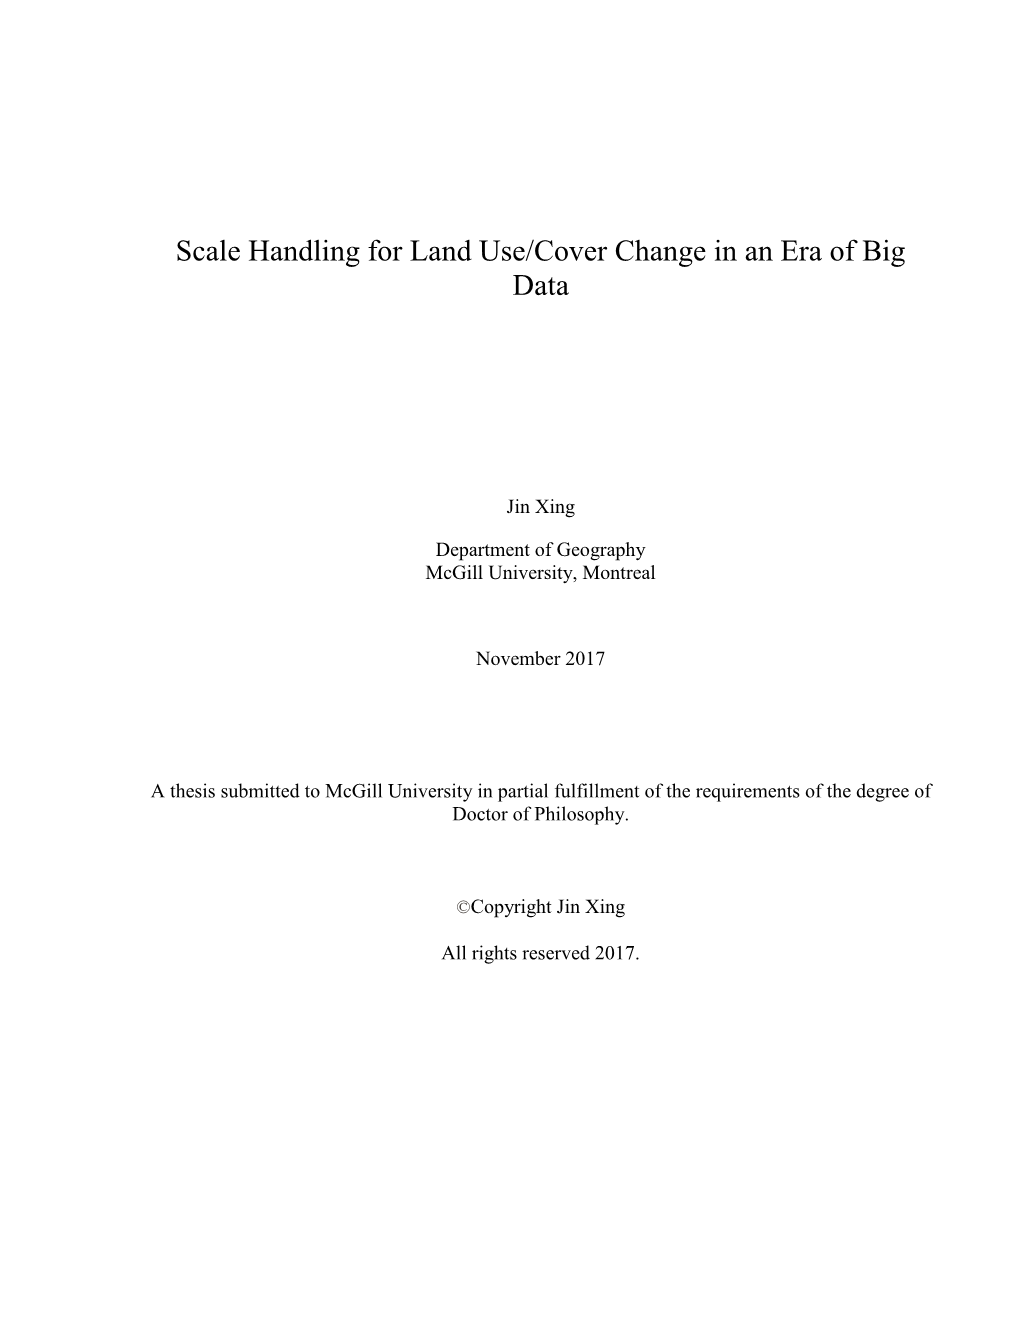 Scale Handling for Land Use/Cover Change in an Era of Big Data